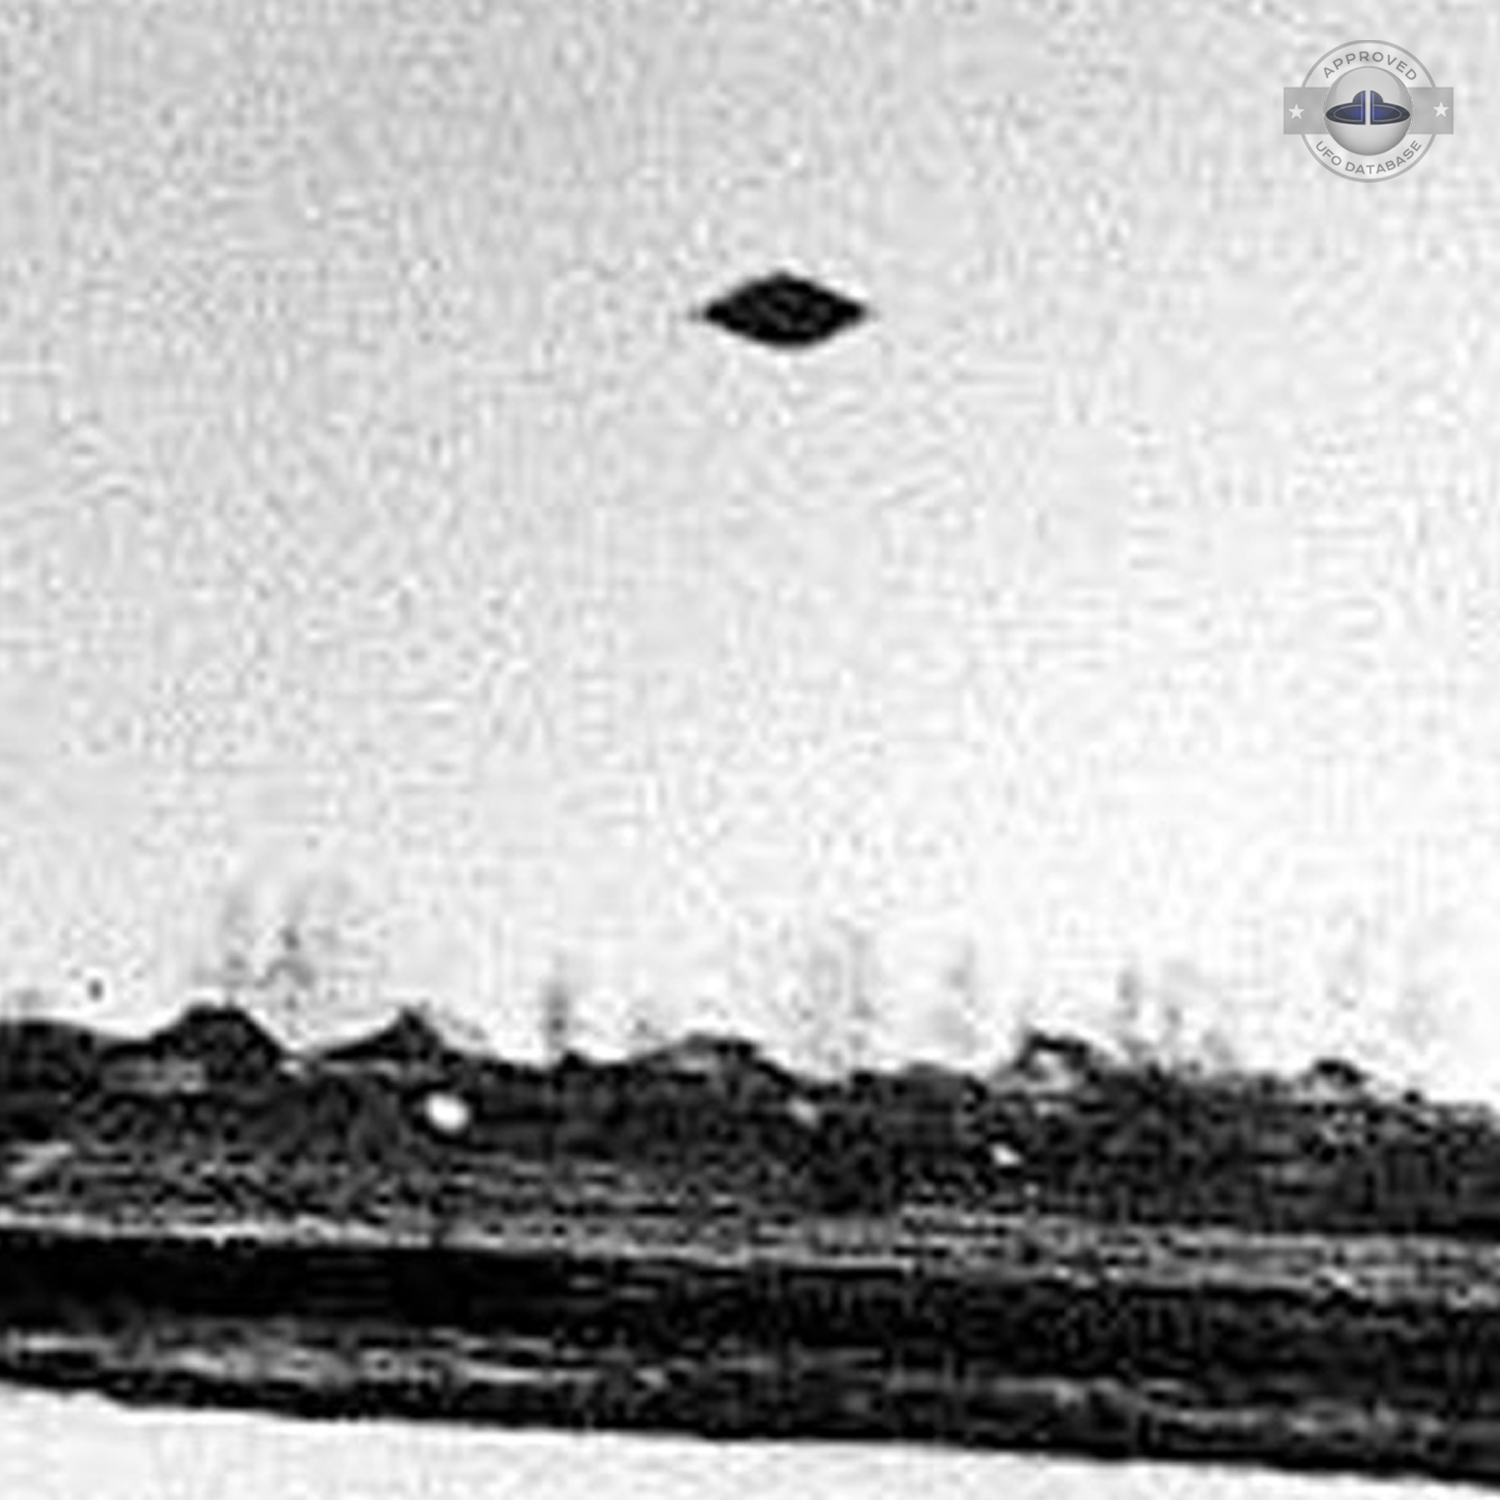 Sighting of UFO by two teenagers in Russia - Volga river Tver | 1991 UFO Picture #215-3